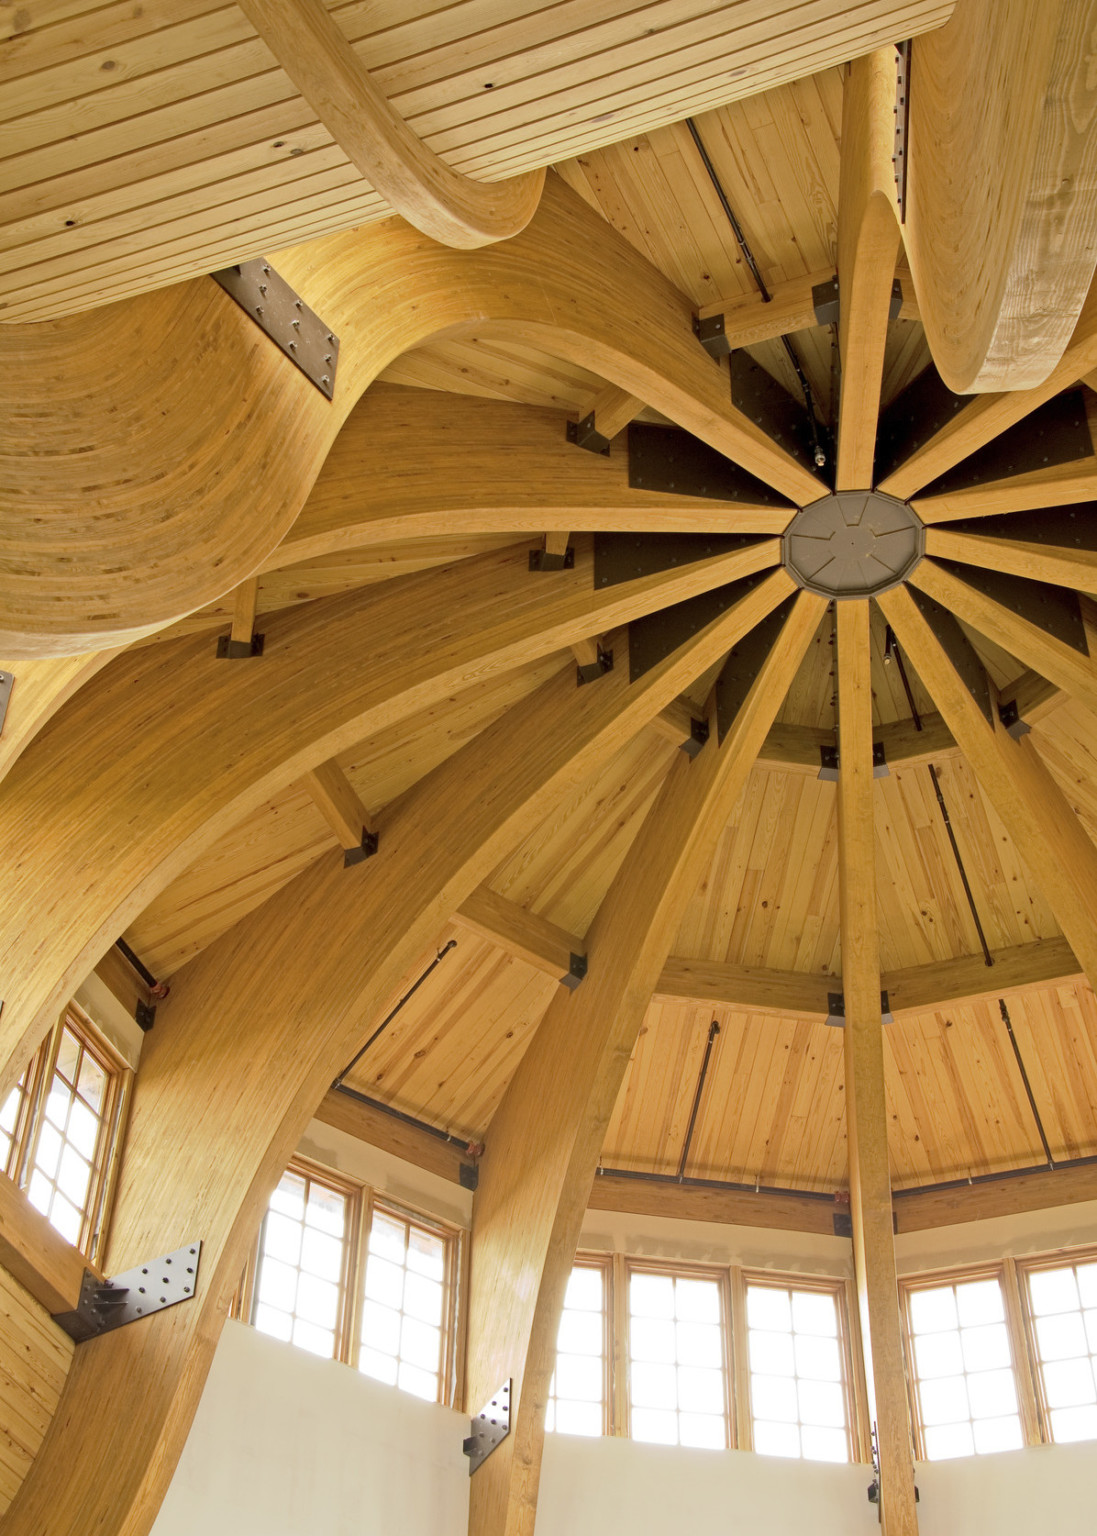 Sections of wood flow up the walls to meet in the cupola center circle